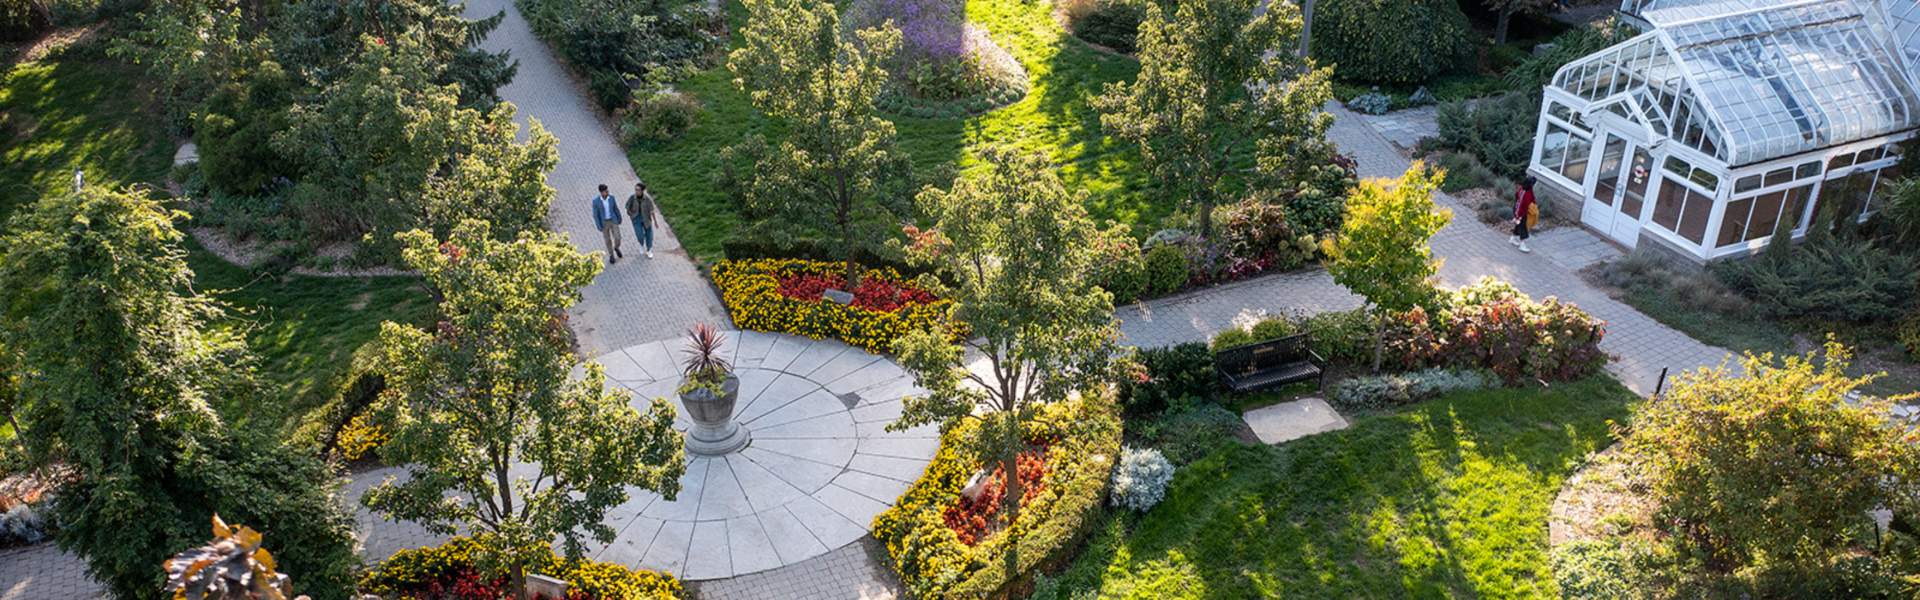 Aerial view of the conservatory and gardens on U of G campus in summer.